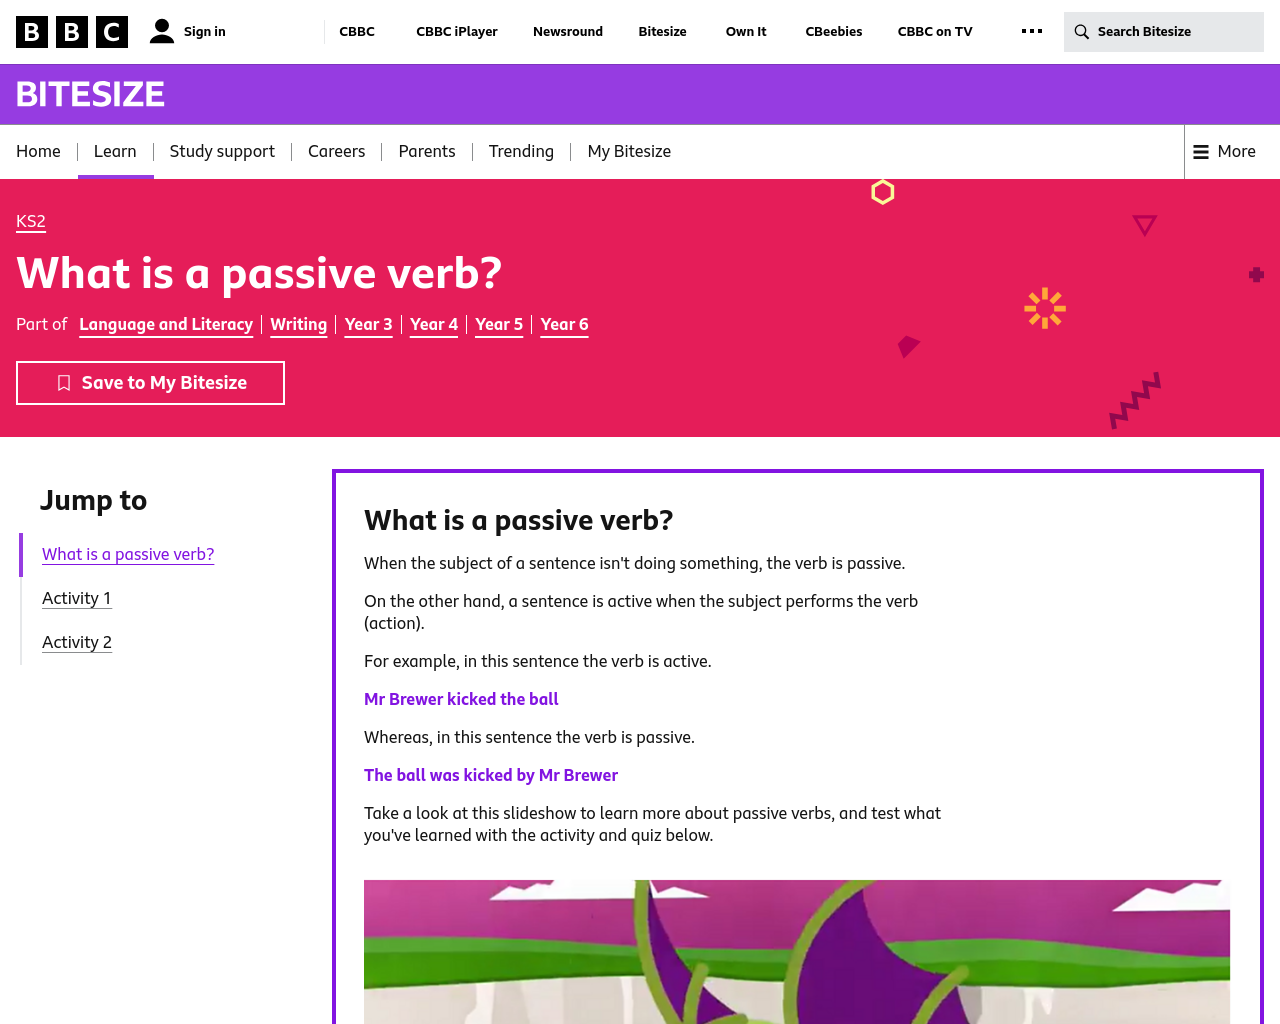 What is a passive verb?